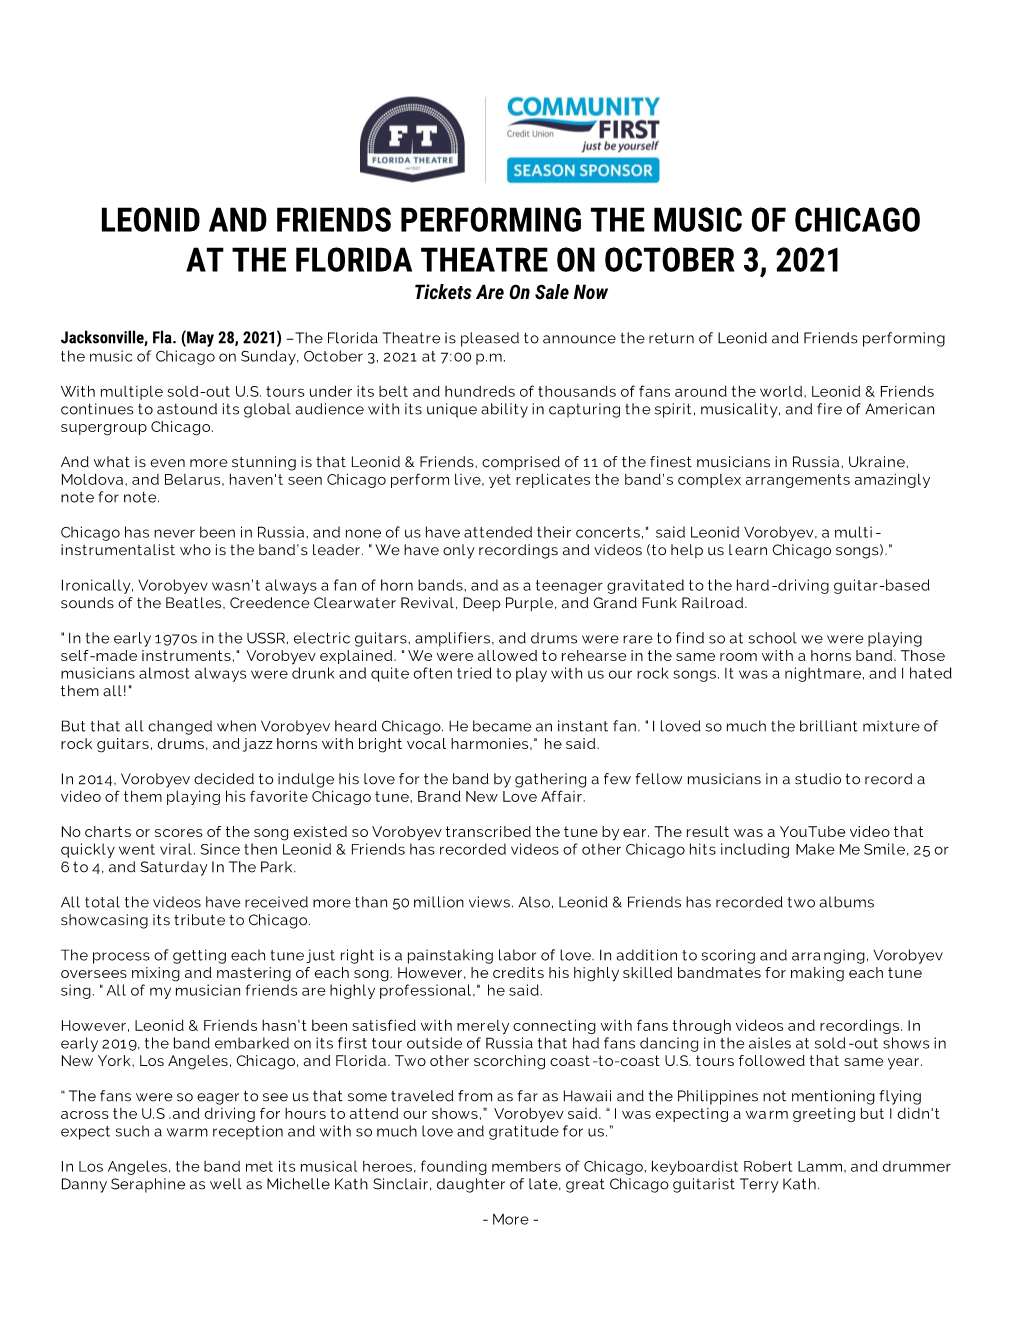 LEONID and FRIENDS PERFORMING the MUSIC of CHICAGO at the FLORIDA THEATRE on OCTOBER 3, 2021 Tickets Are on Sale Now